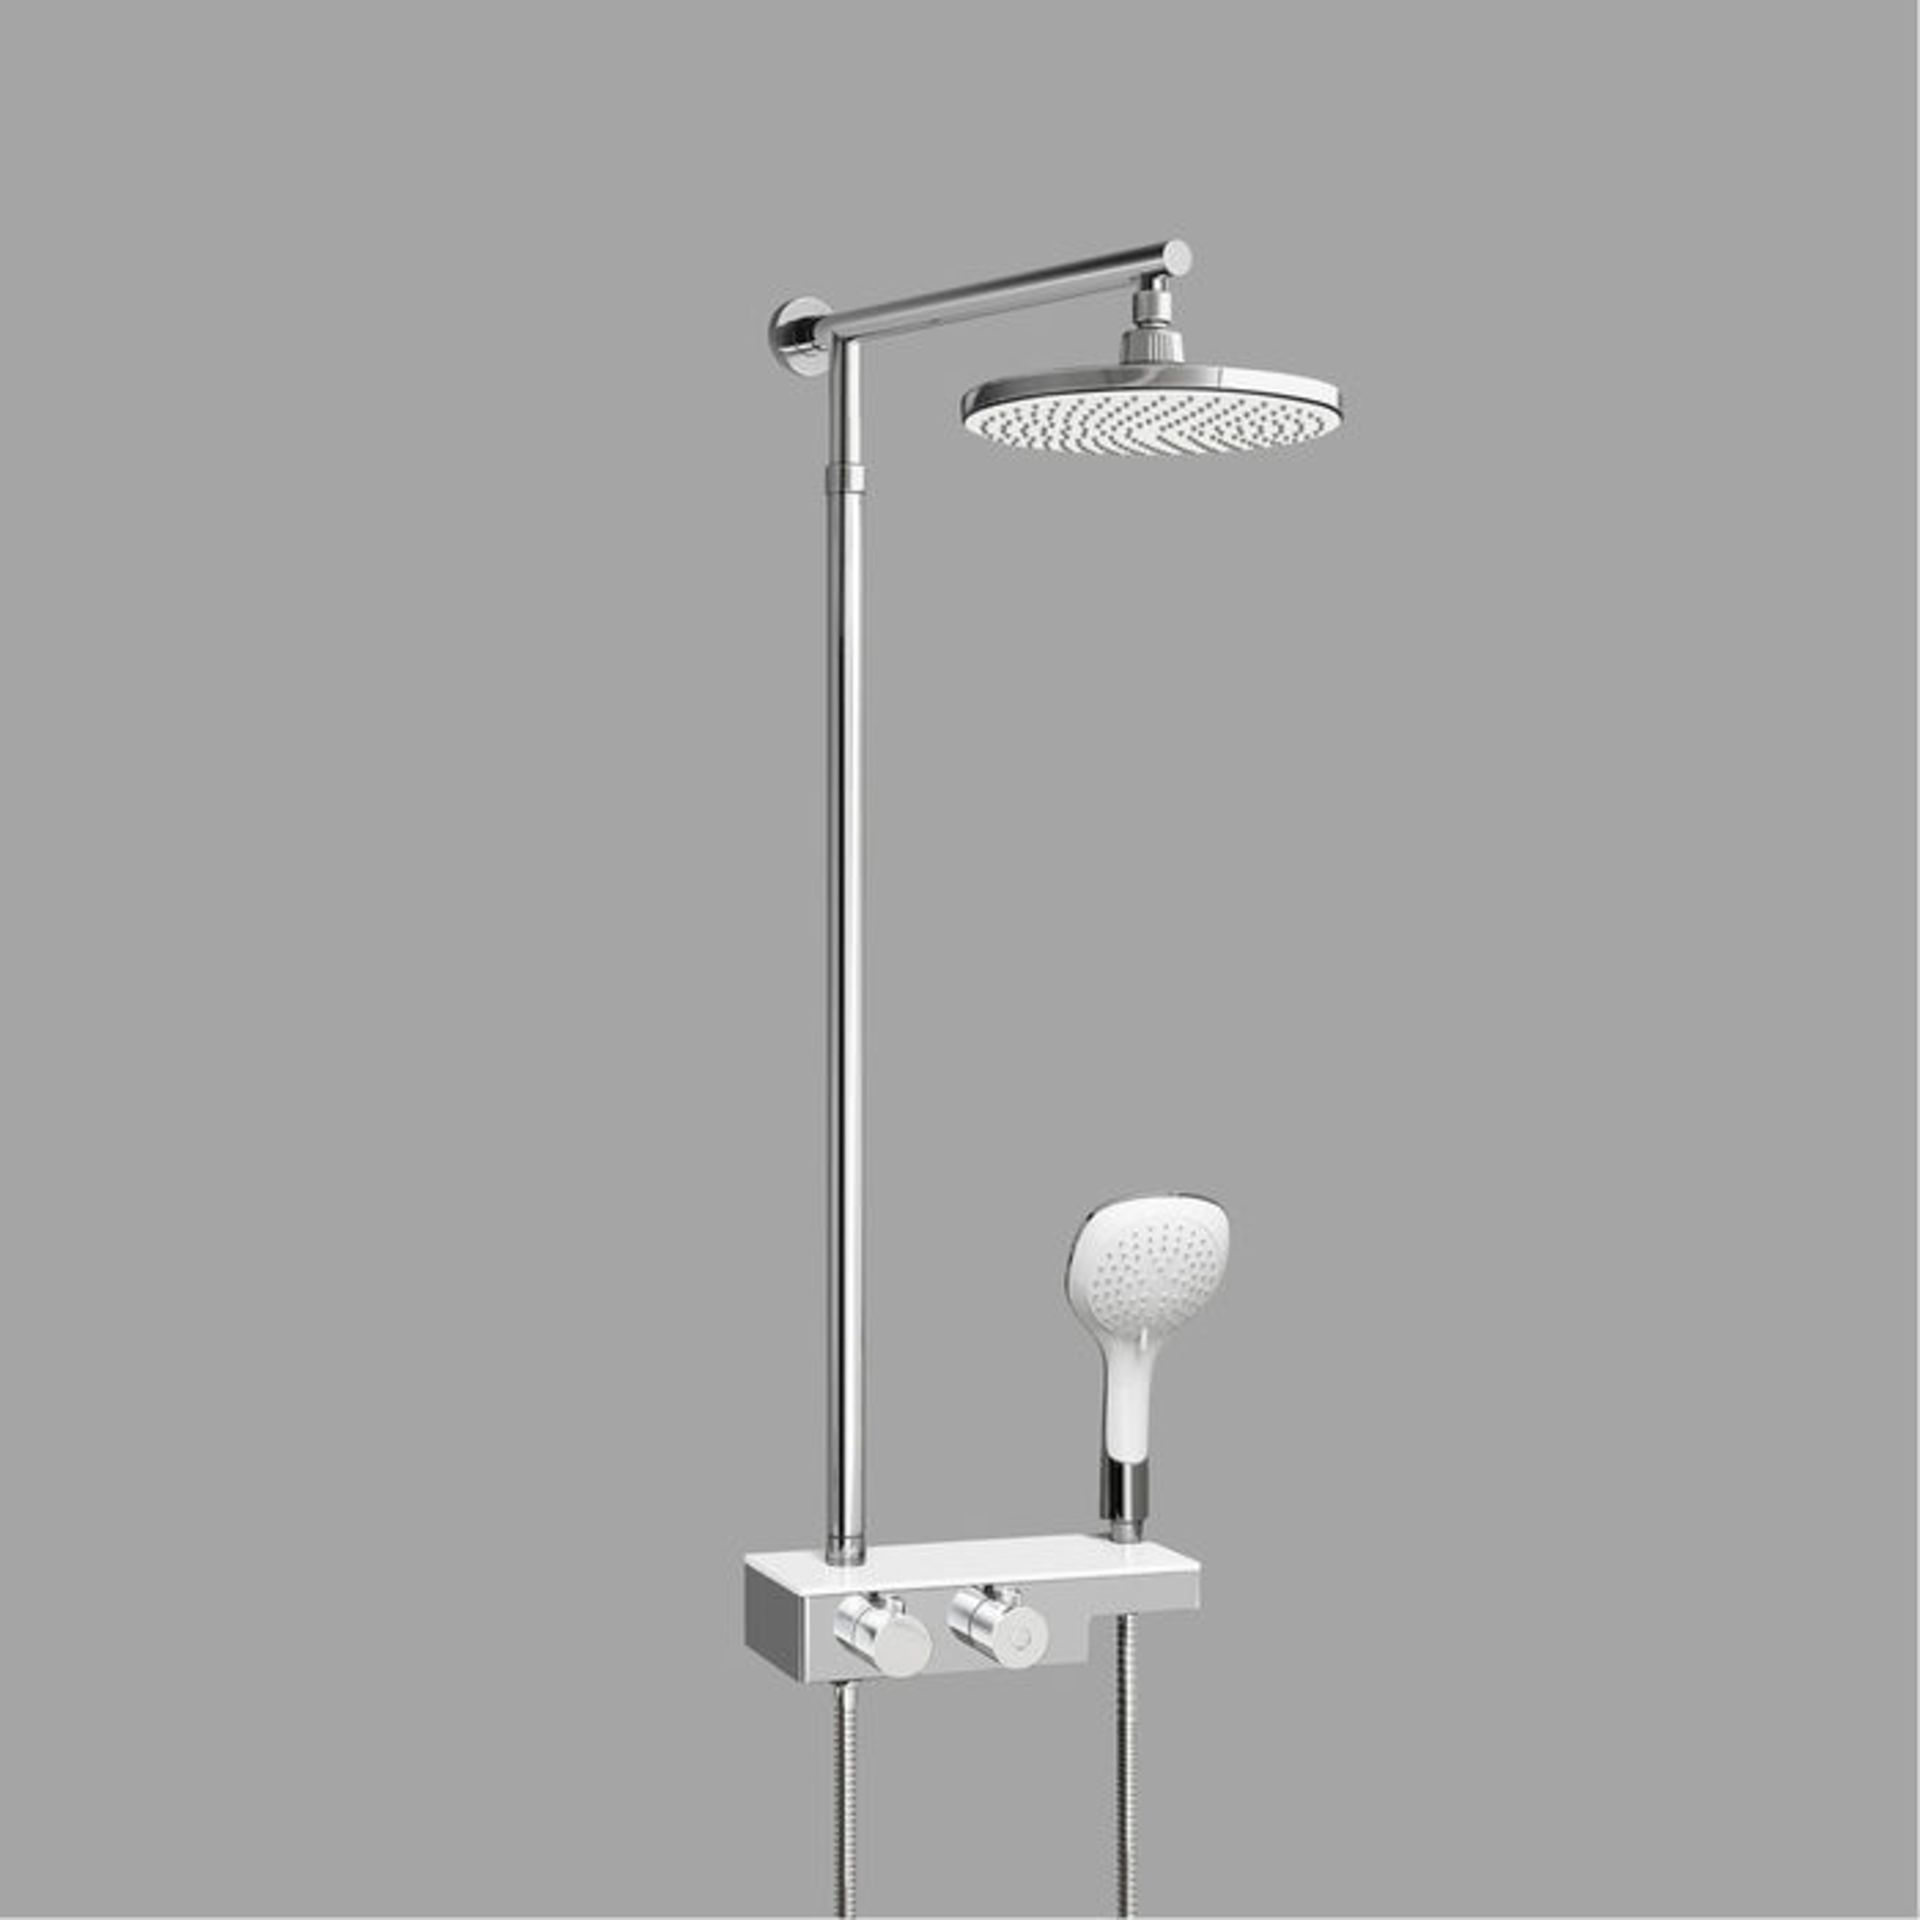 (MW41) Round Exposed Thermostatic Mixer Shower Kit Medium Head & Shelf. RRP £349.99. Cool to touch - Bild 3 aus 6